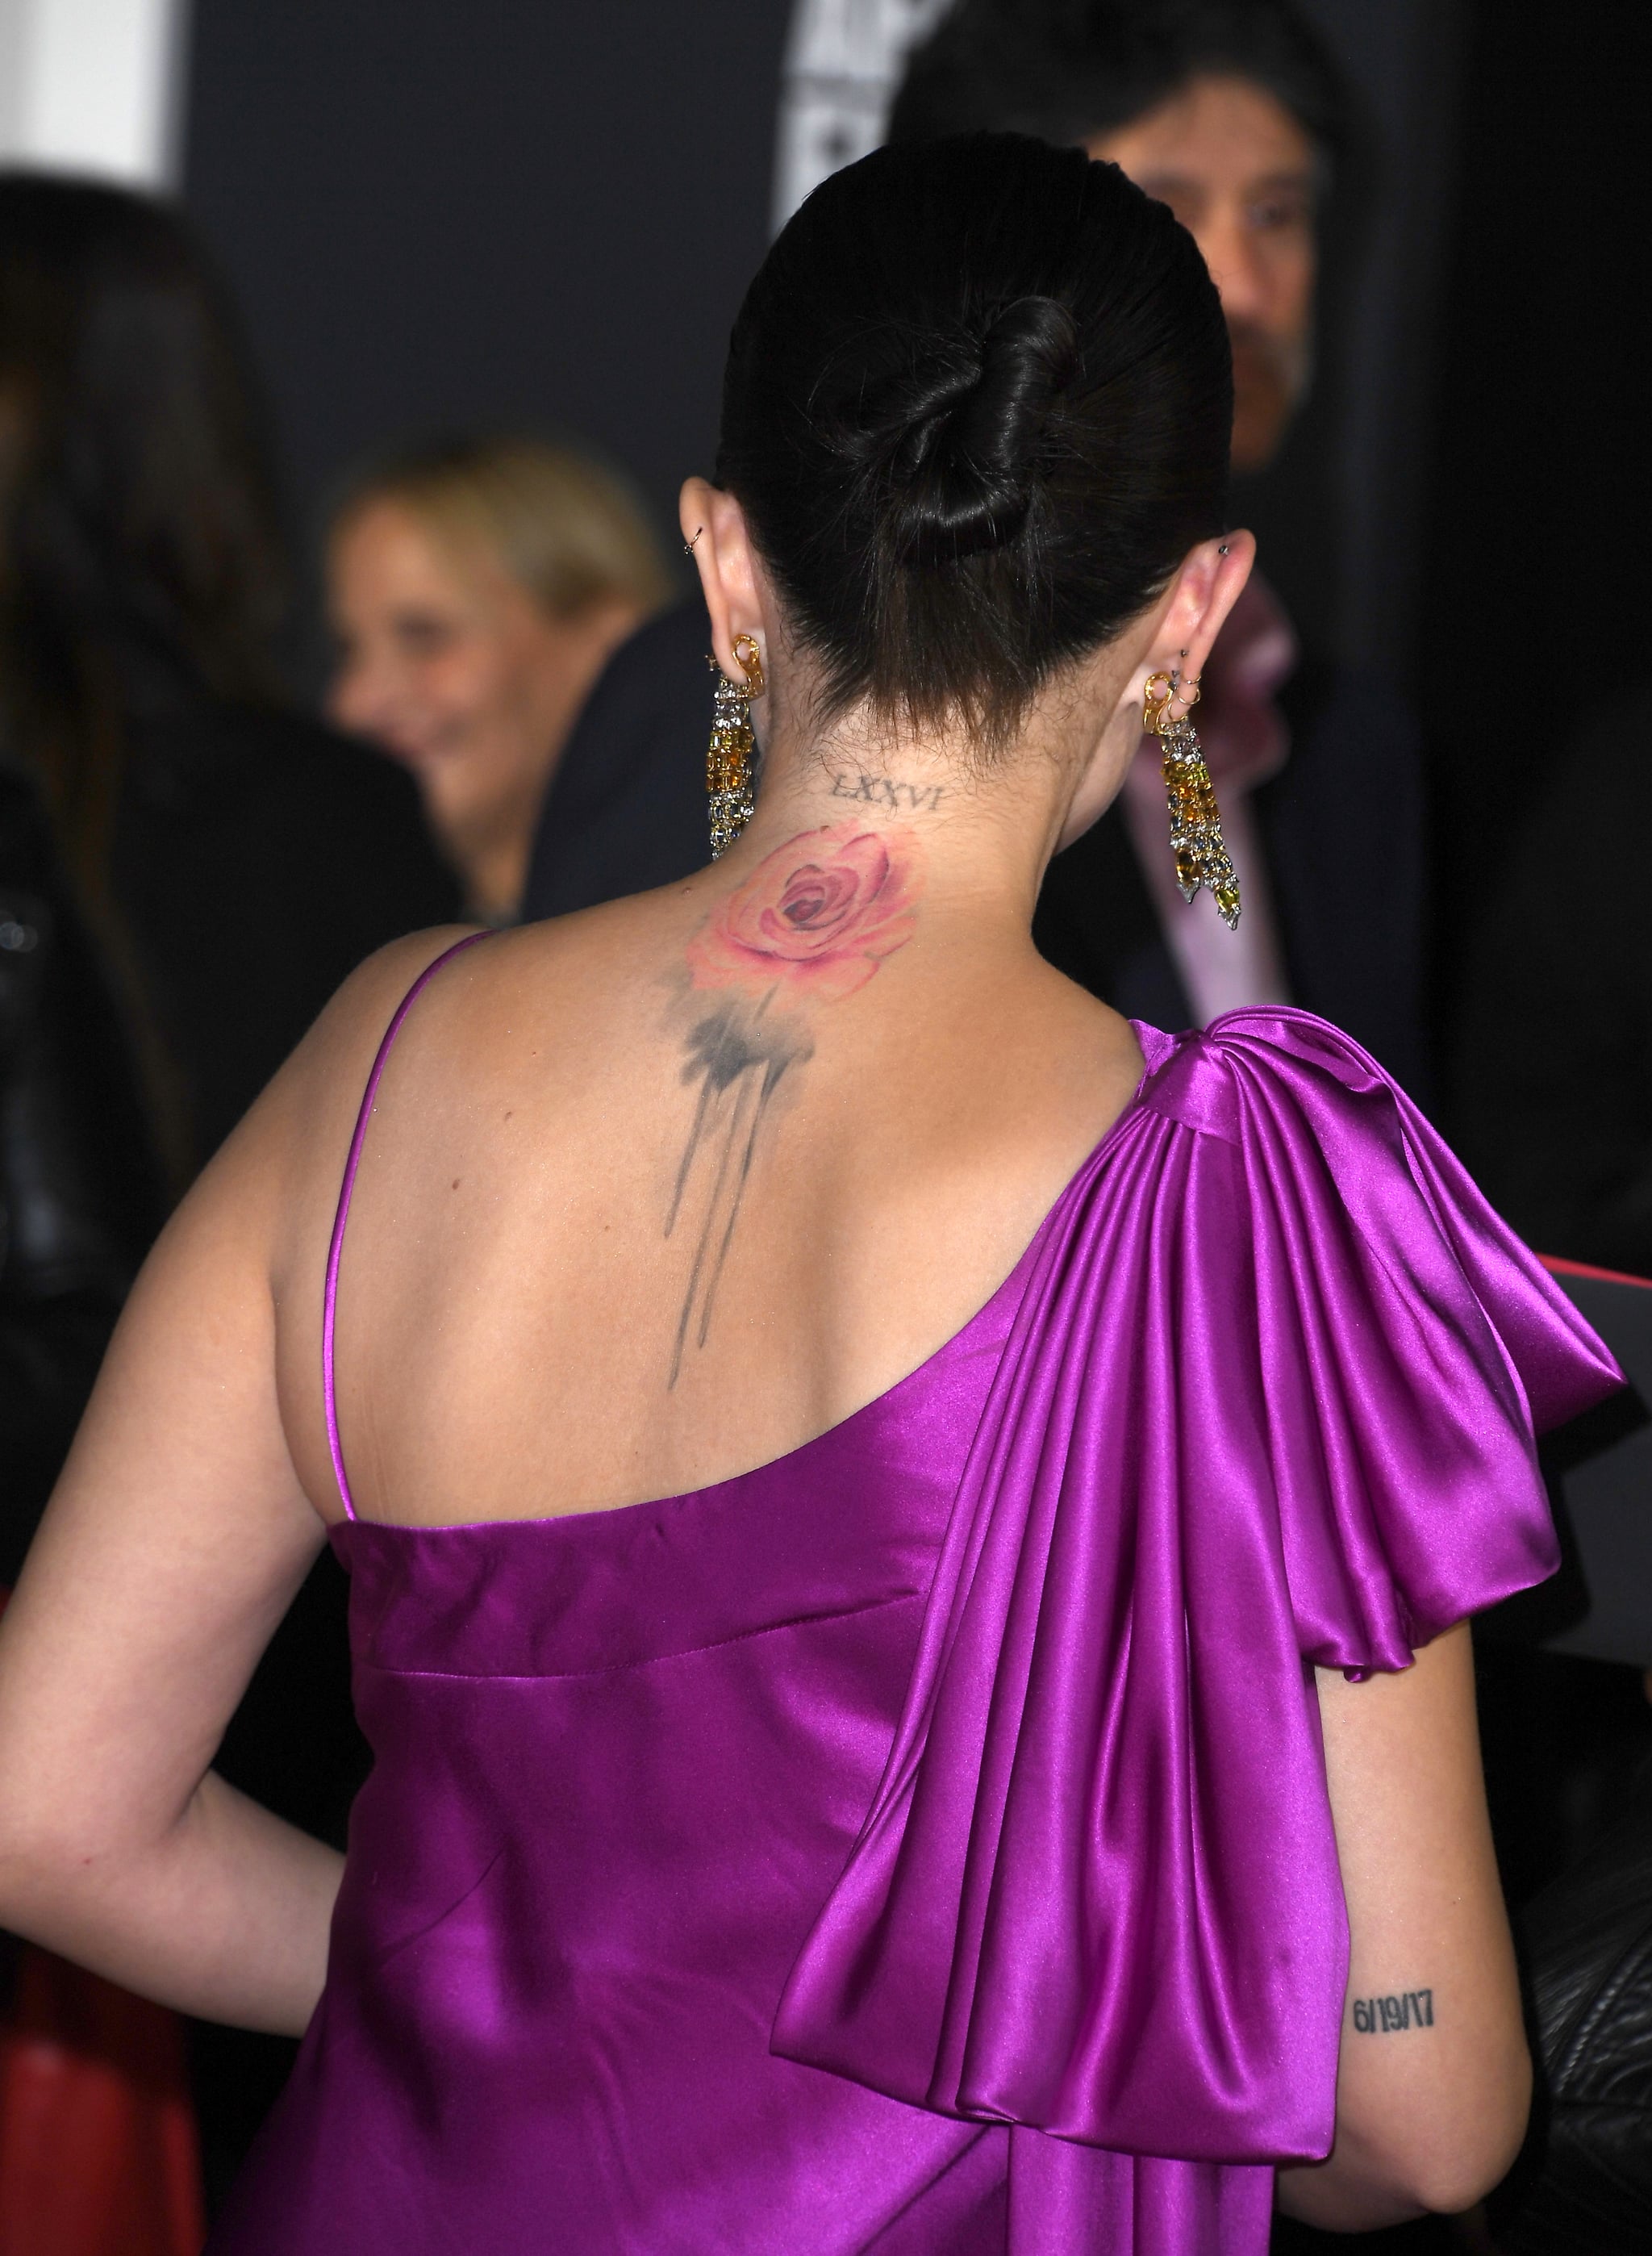 Selena Gomez is Selling 7 of Her Temporary Tattoos on Her Revival Tour